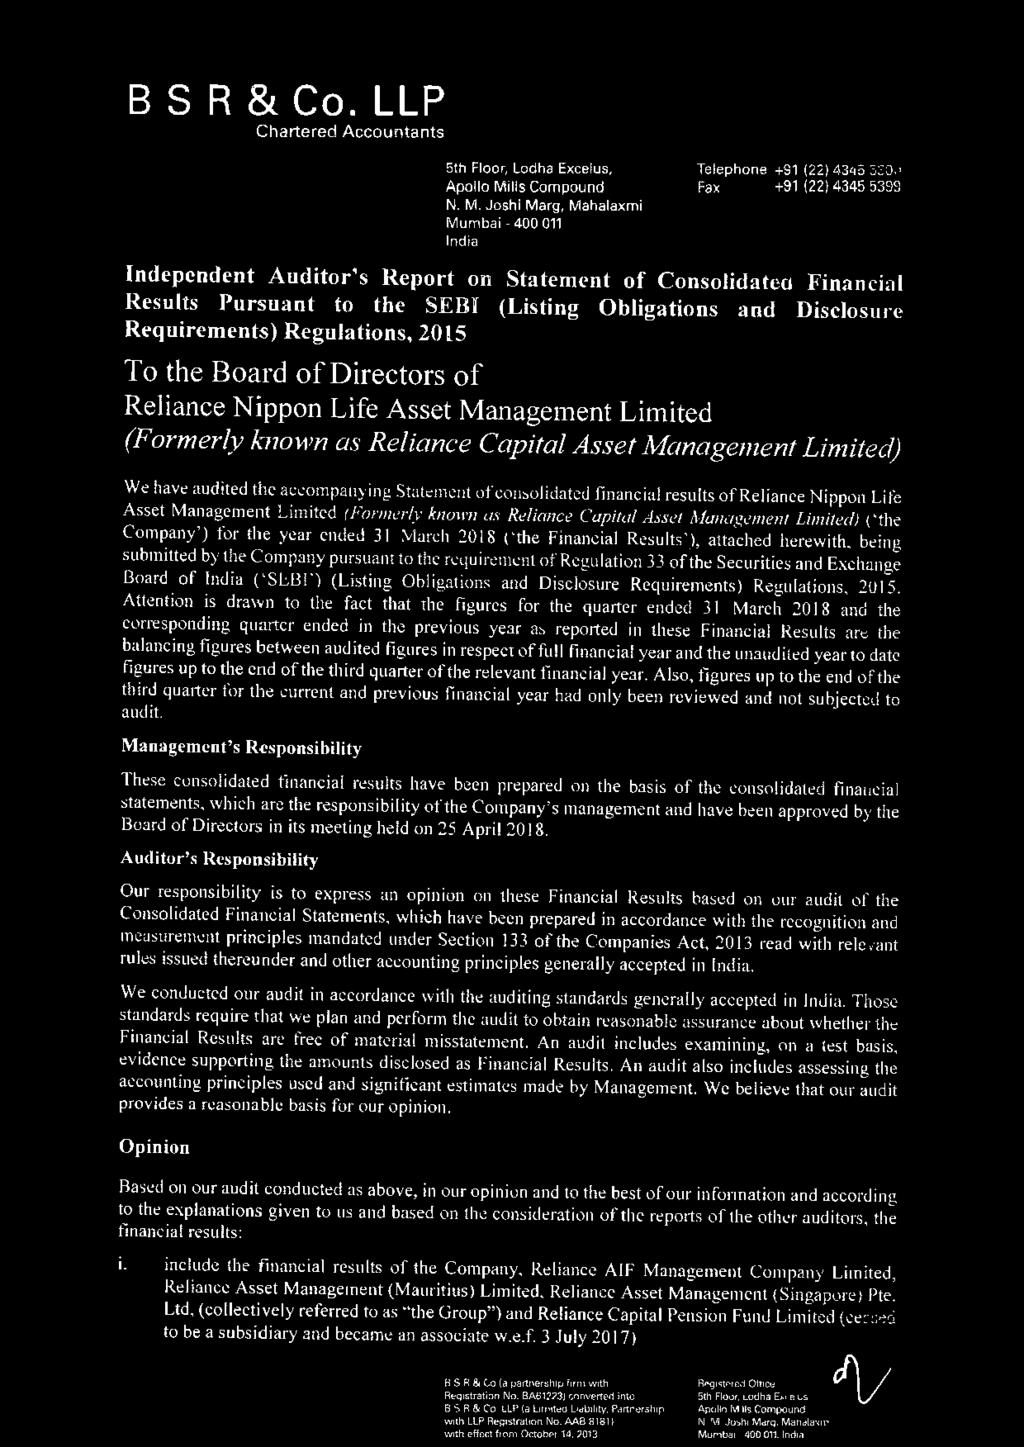 Joshi Marg, Mahalaxmi Mumbai - 400 011 India Telephone +91 (22) 4345 5300 Fax +91 (22) 4345 5399 Independent Auditor's Report on Statement of Consolidated Financial Results Pursuant to the SEBI